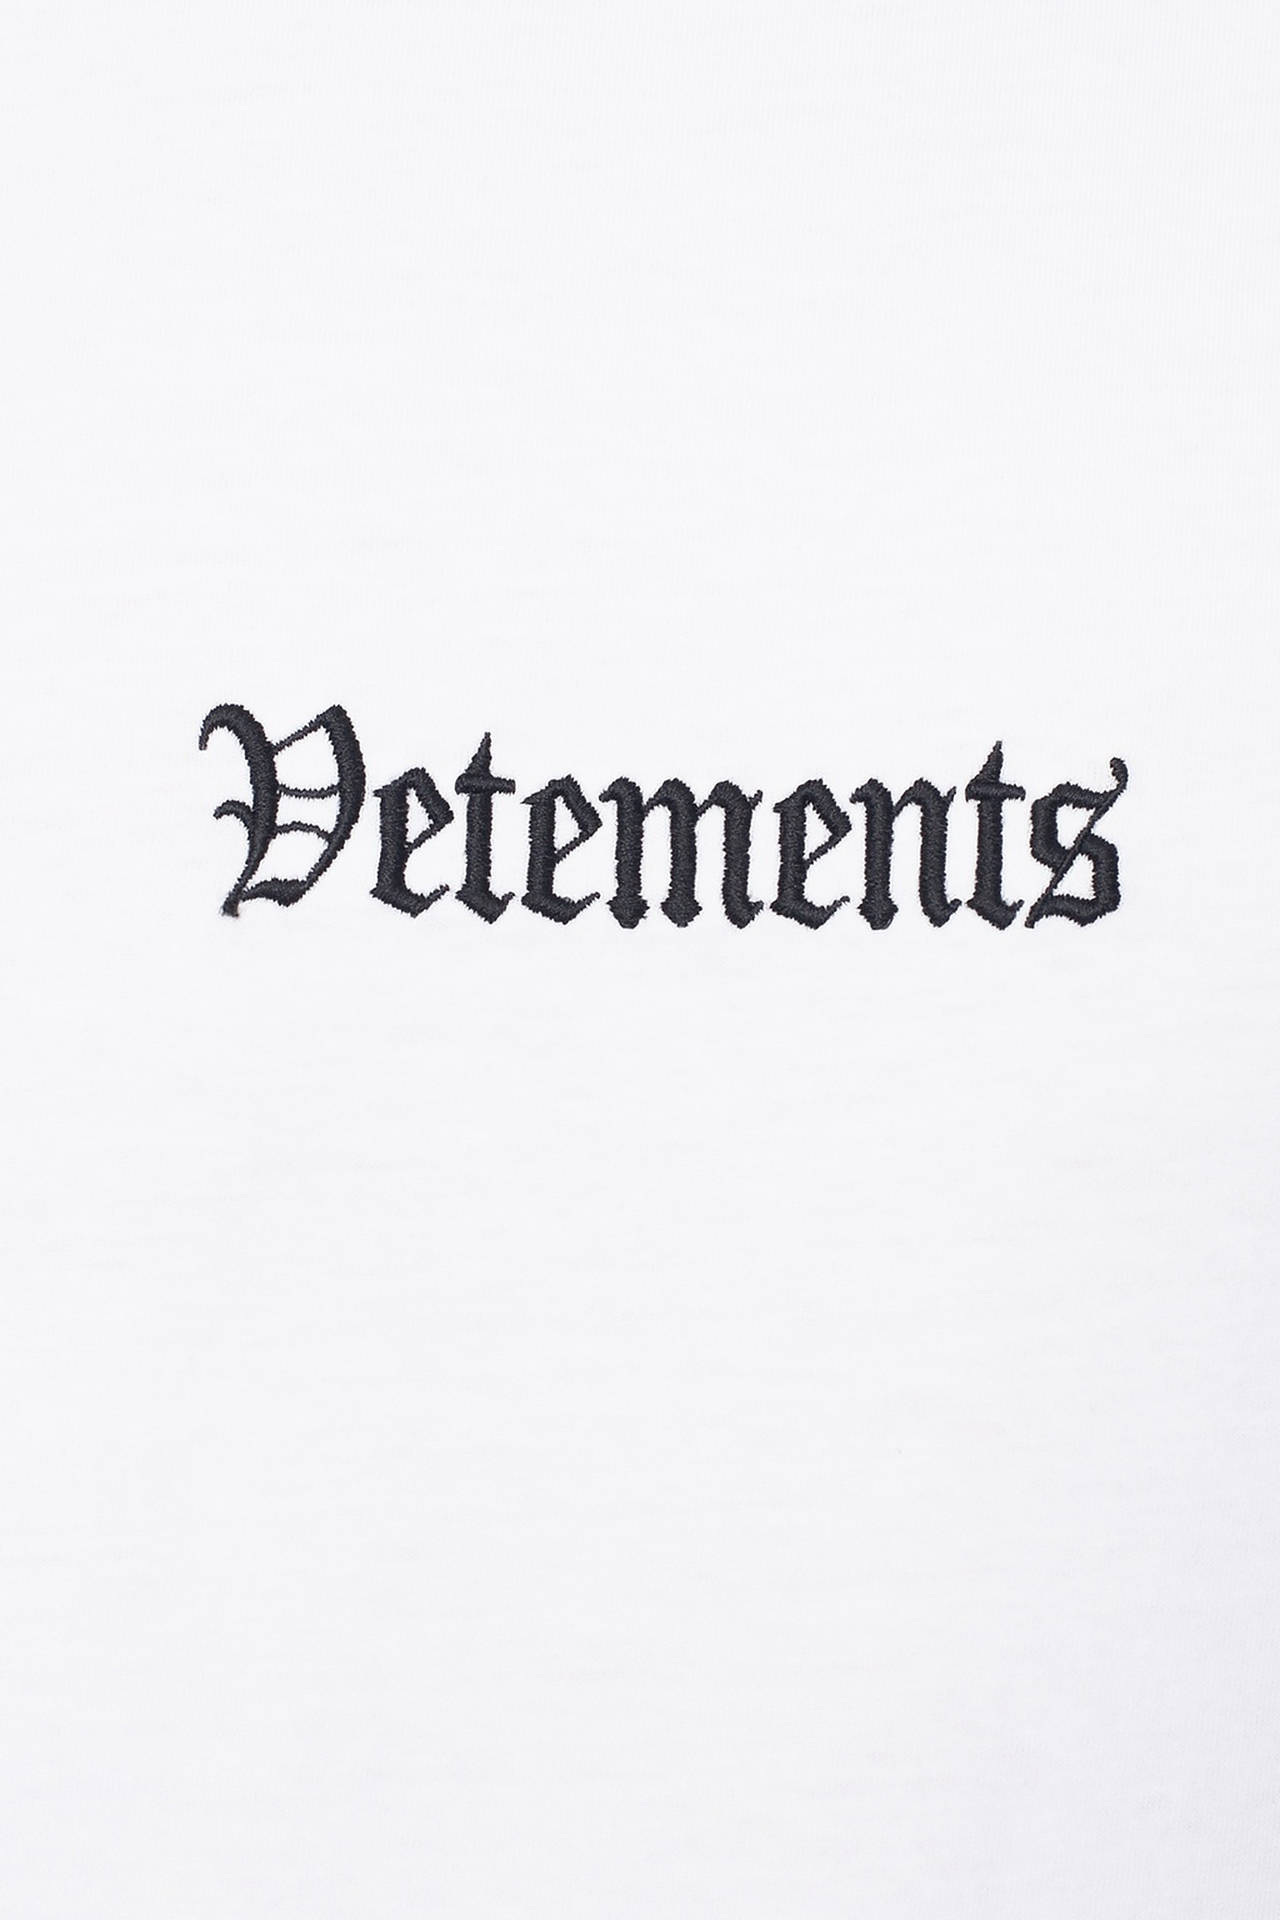 Vetements Embroidered On White Background